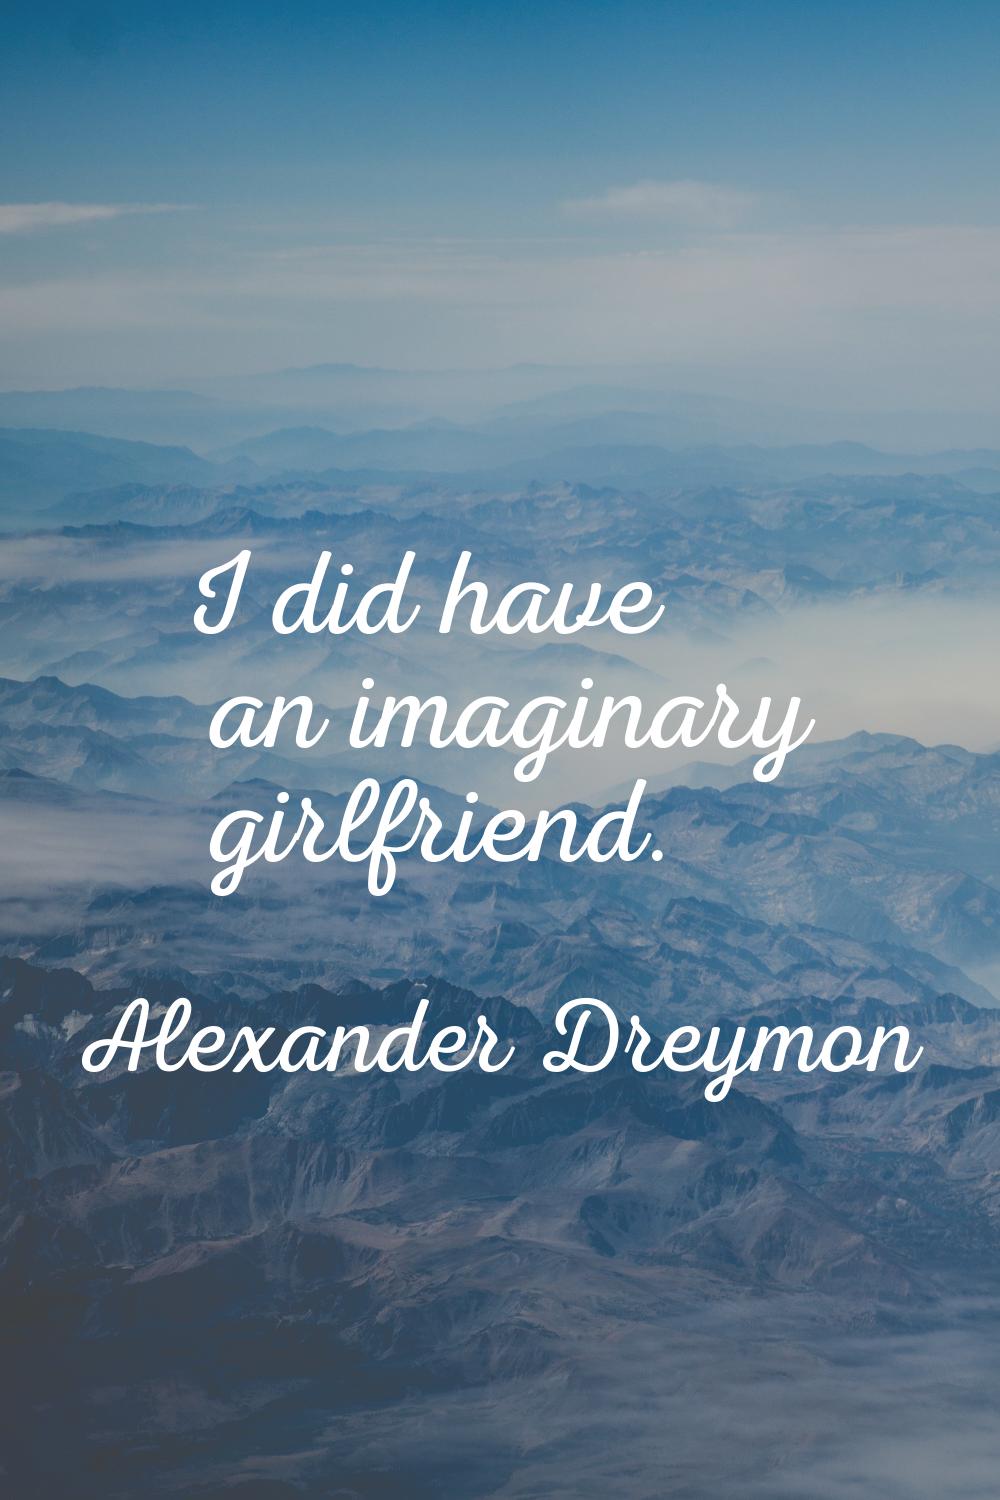 I did have an imaginary girlfriend.